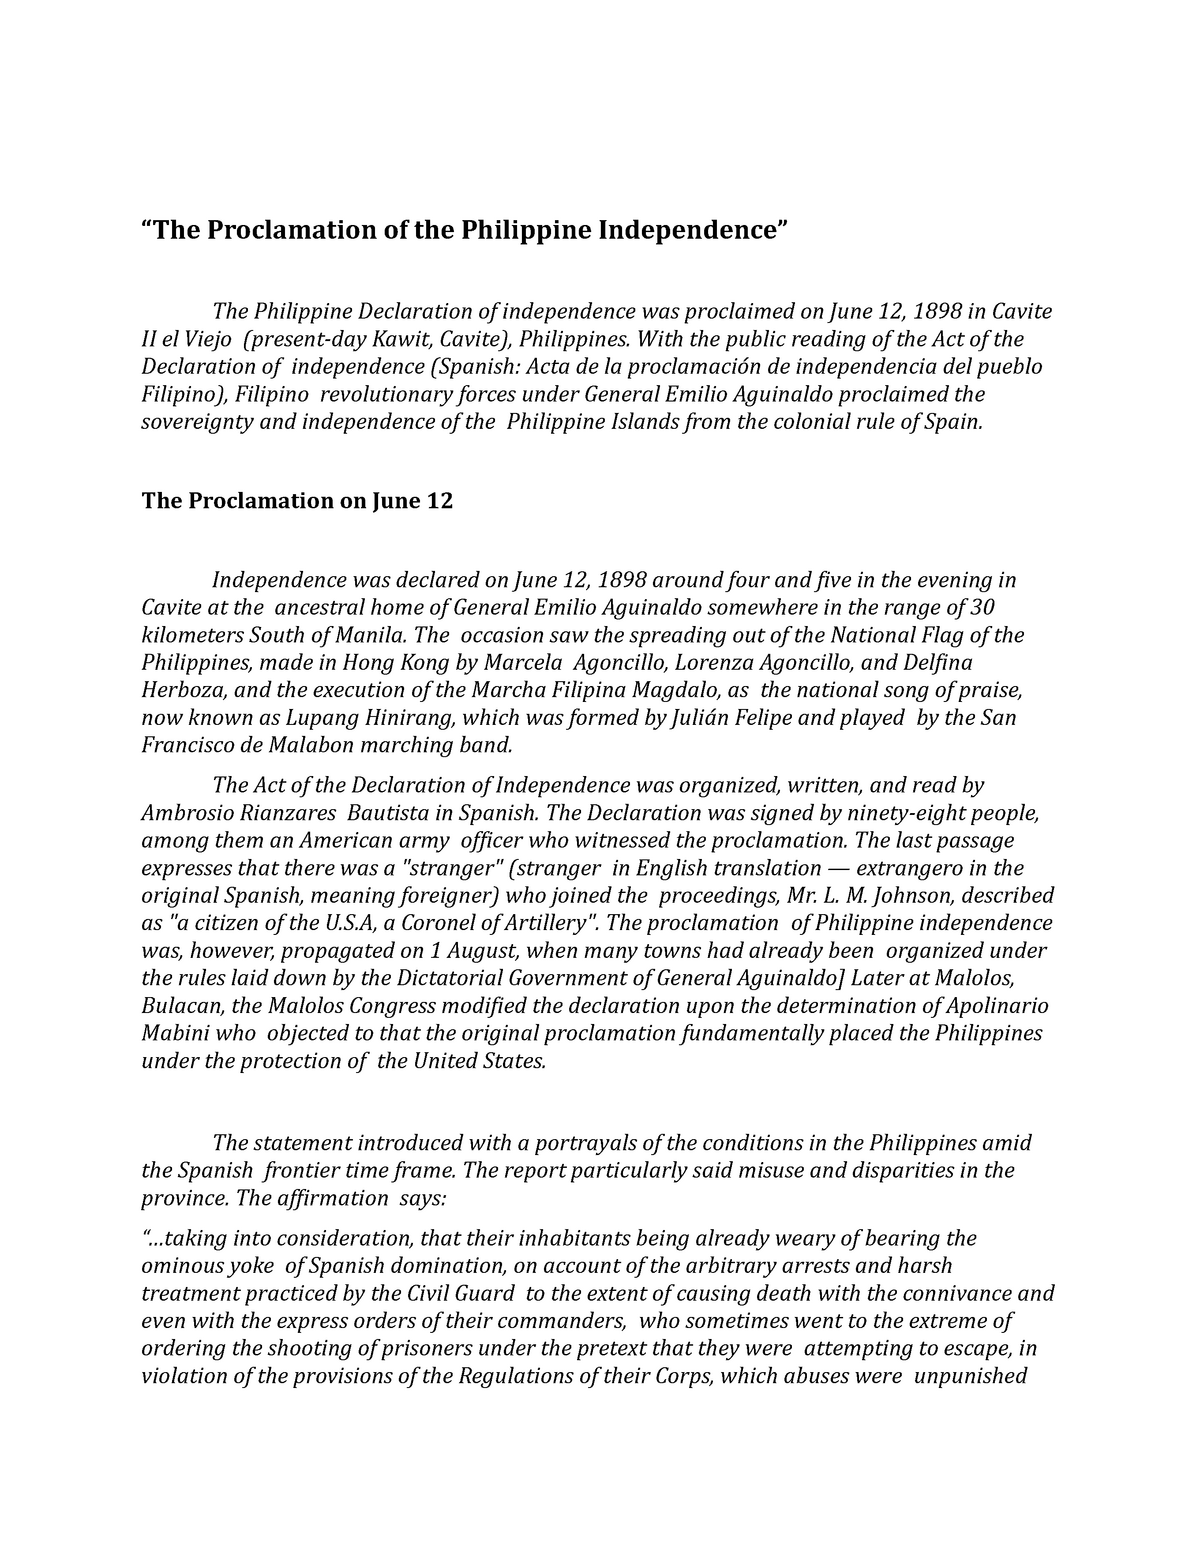 essay about the proclamation of philippine independence